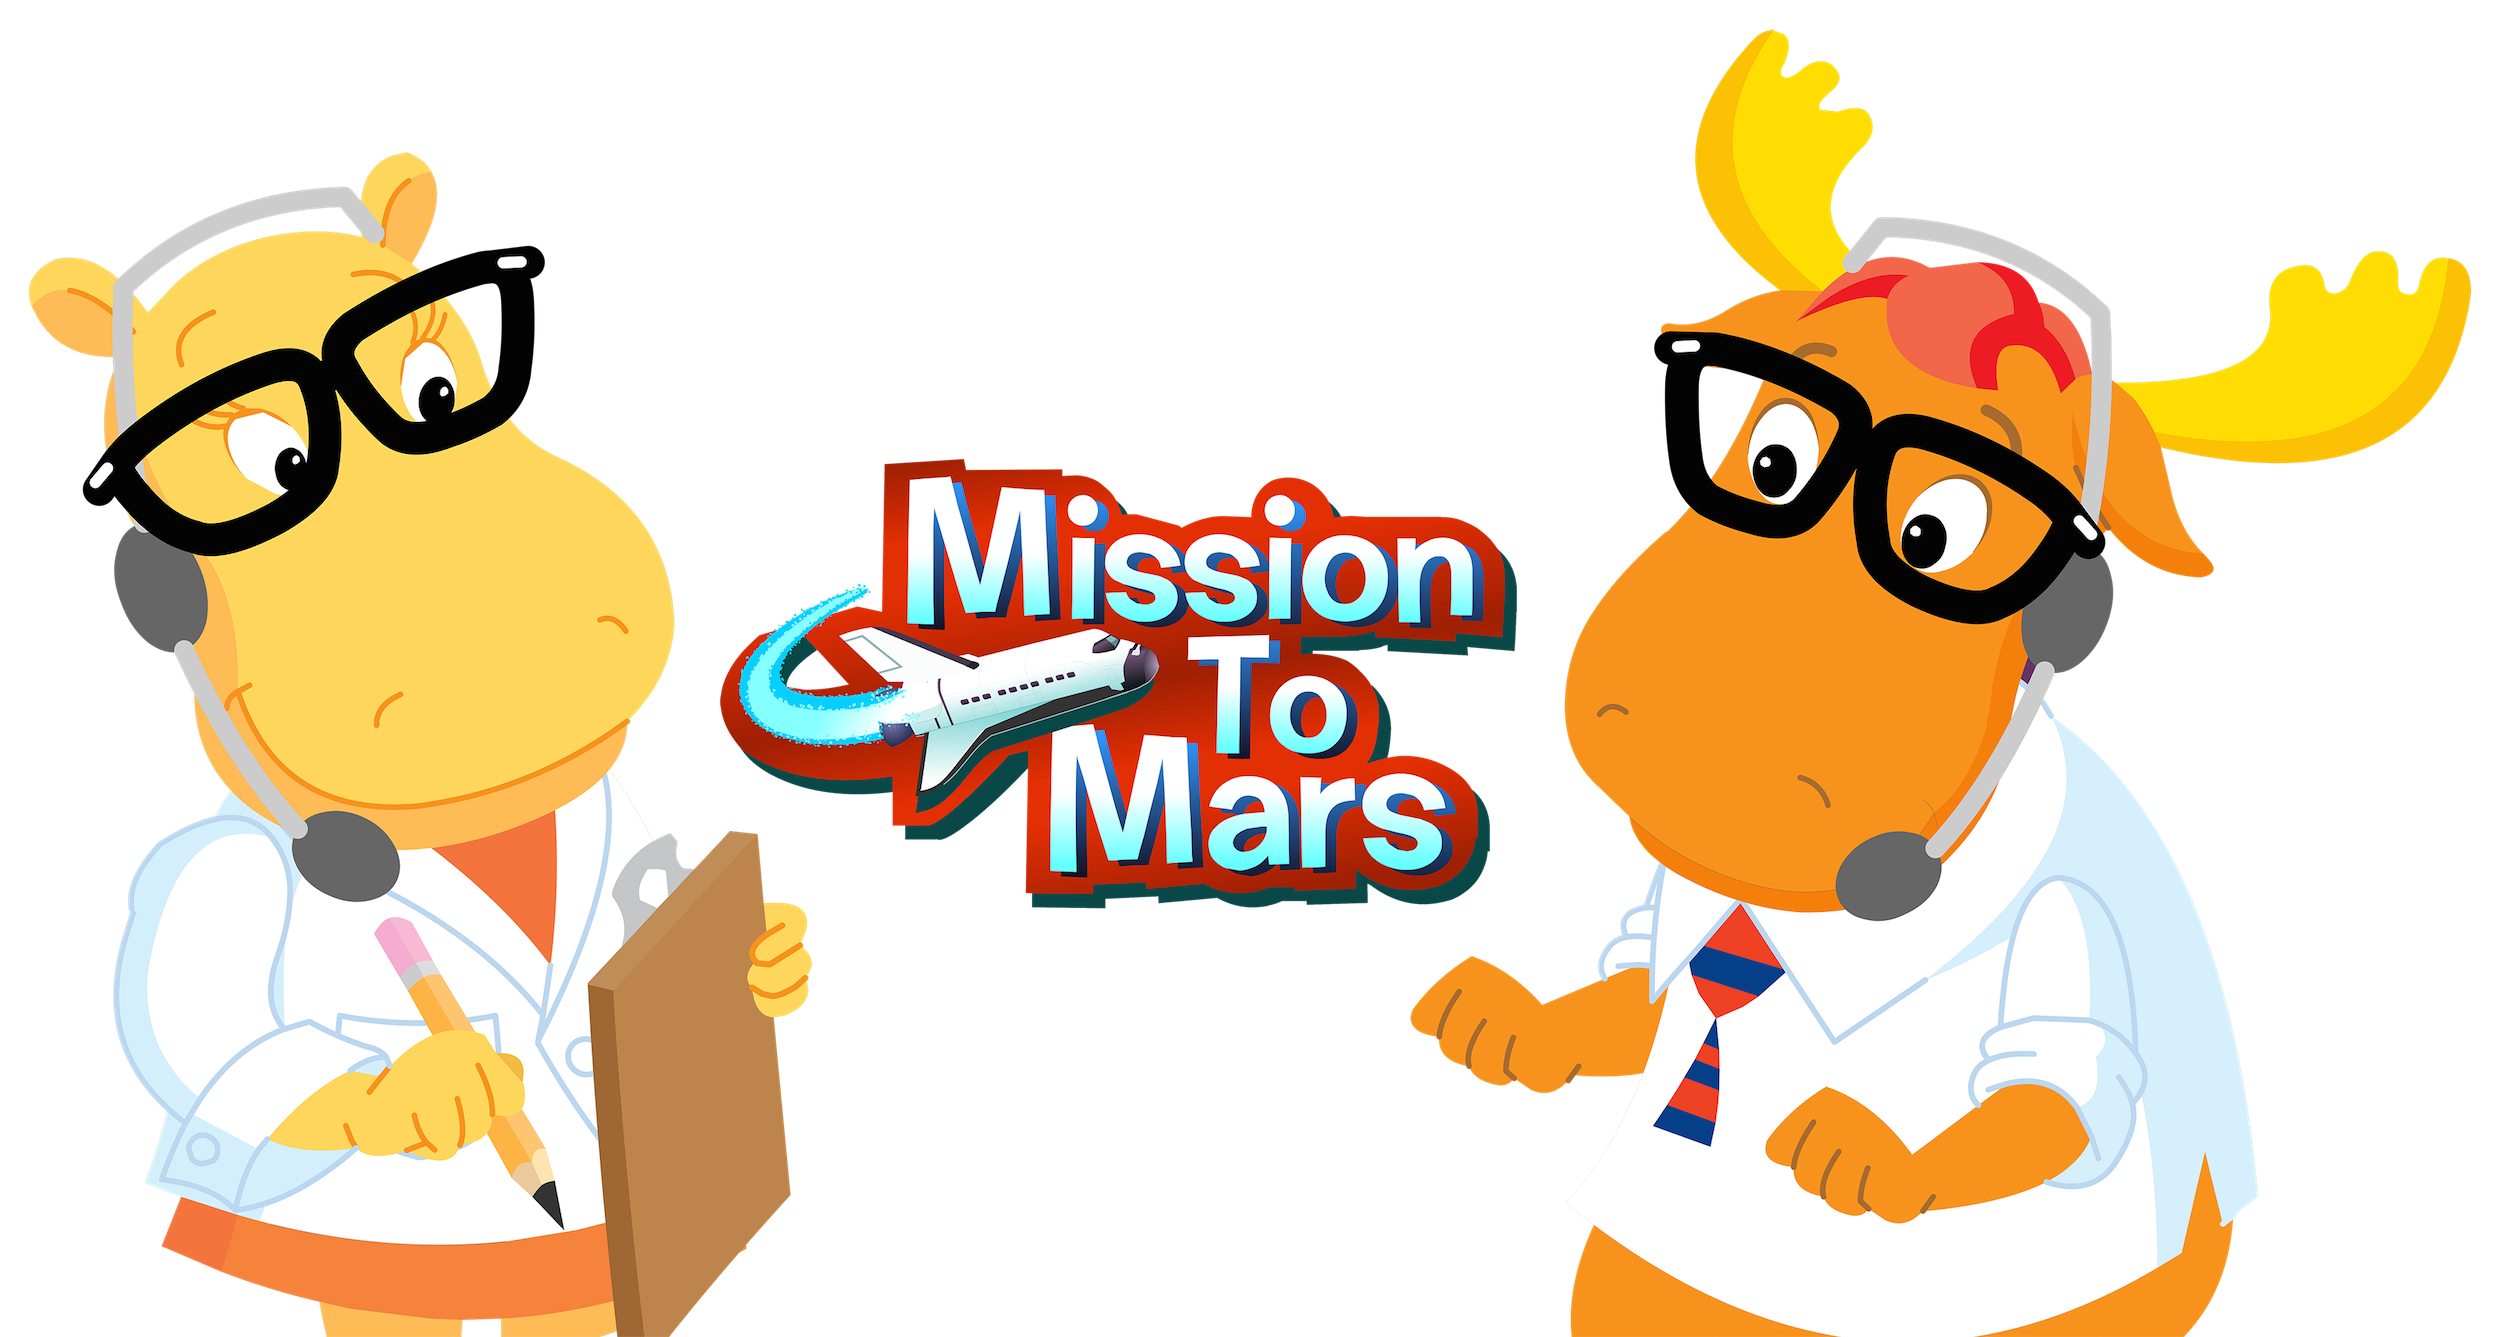 Image the backyardigans characters. Universe clipart mission to mars